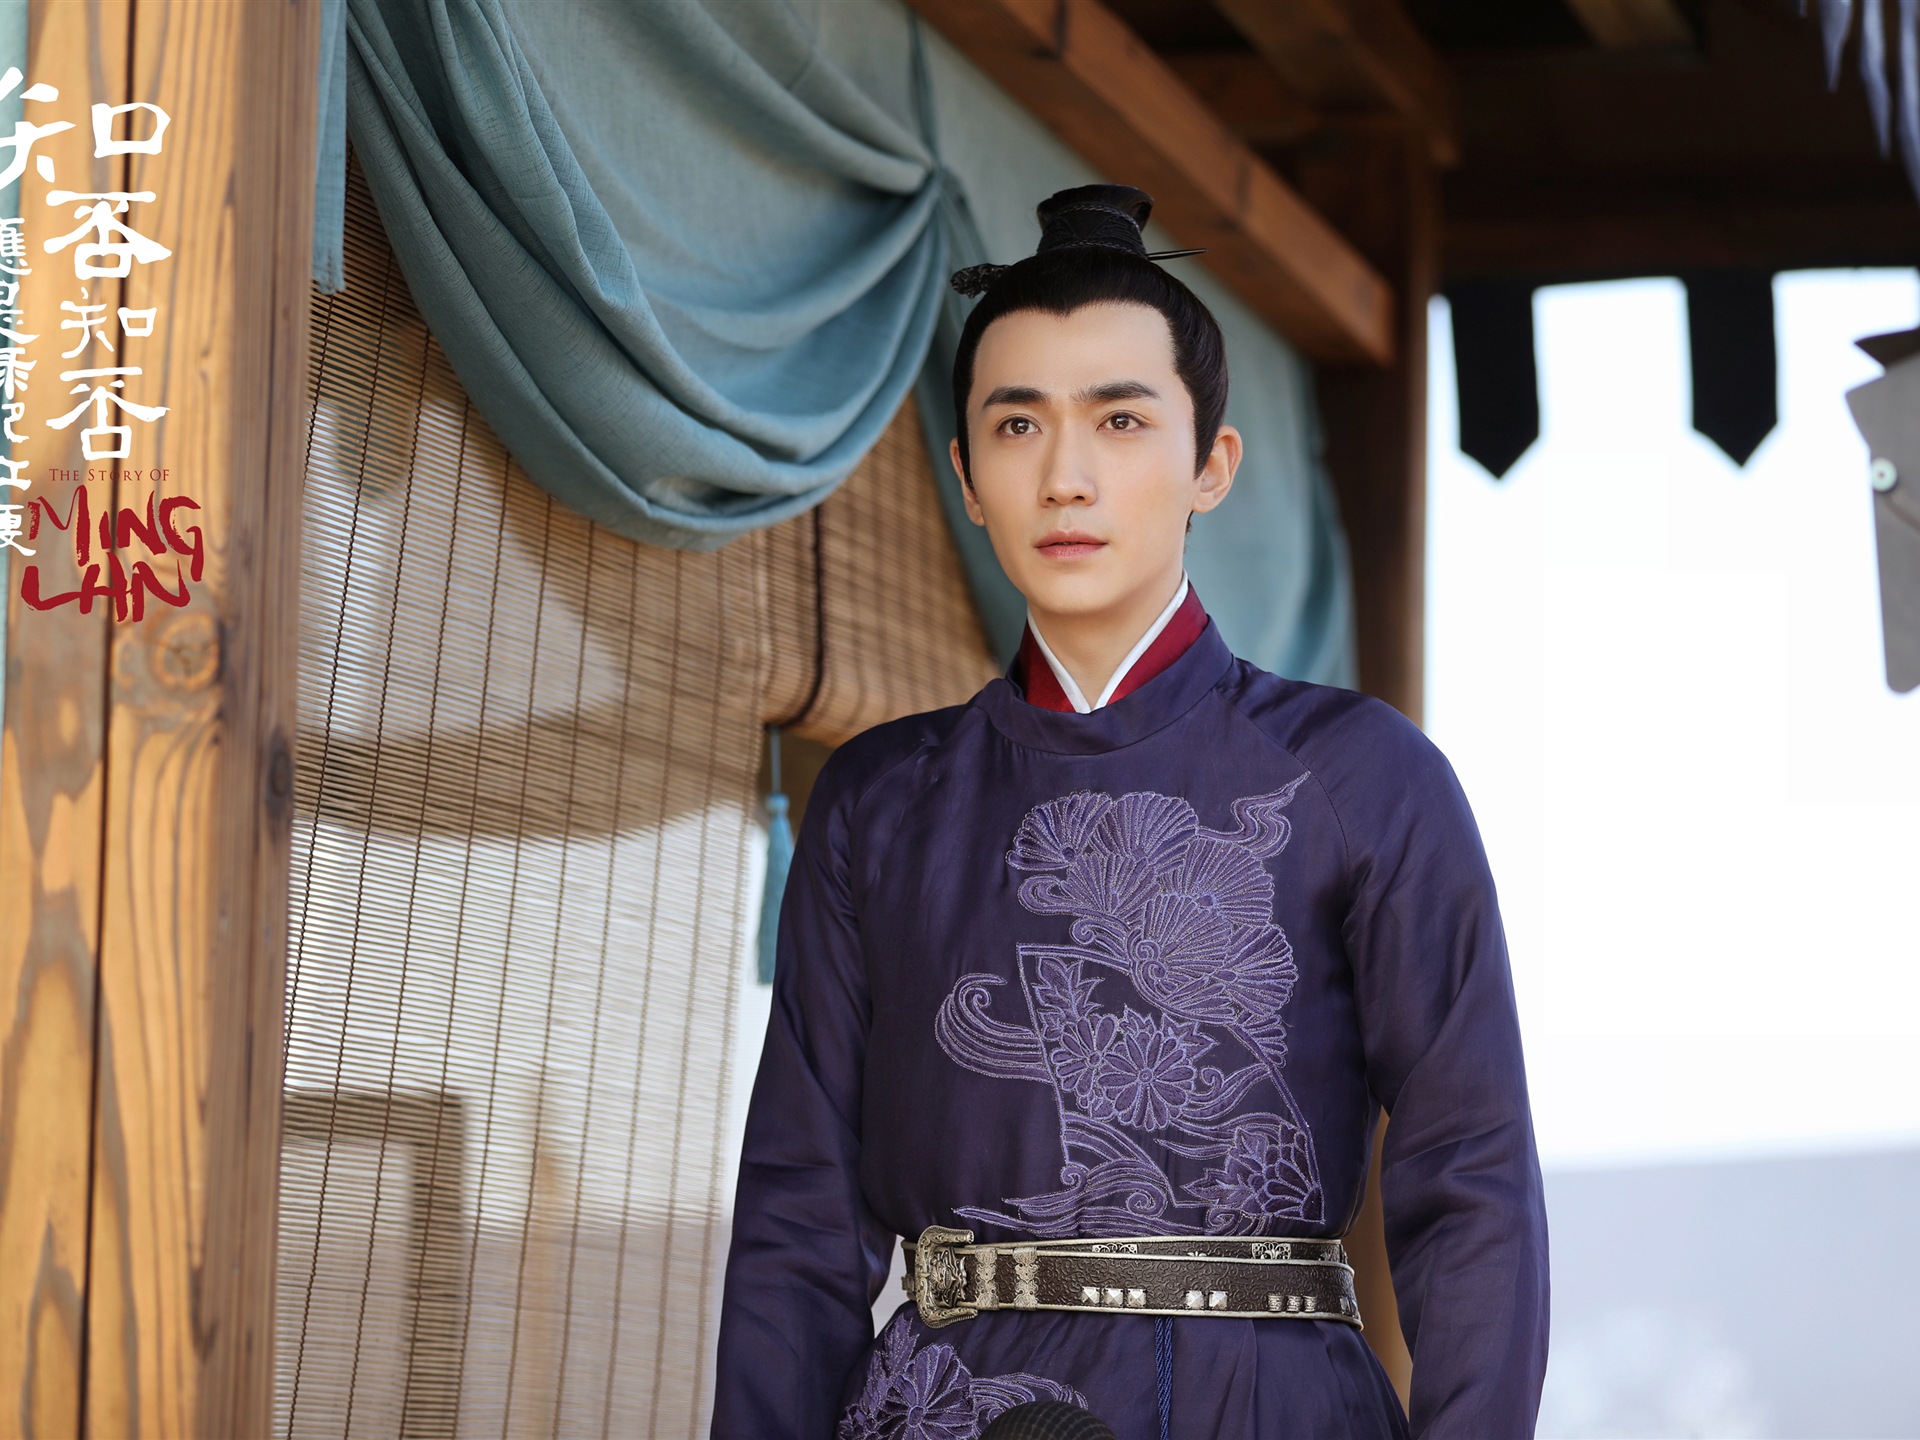 The Story Of MingLan, TV series HD wallpapers #24 - 1920x1440